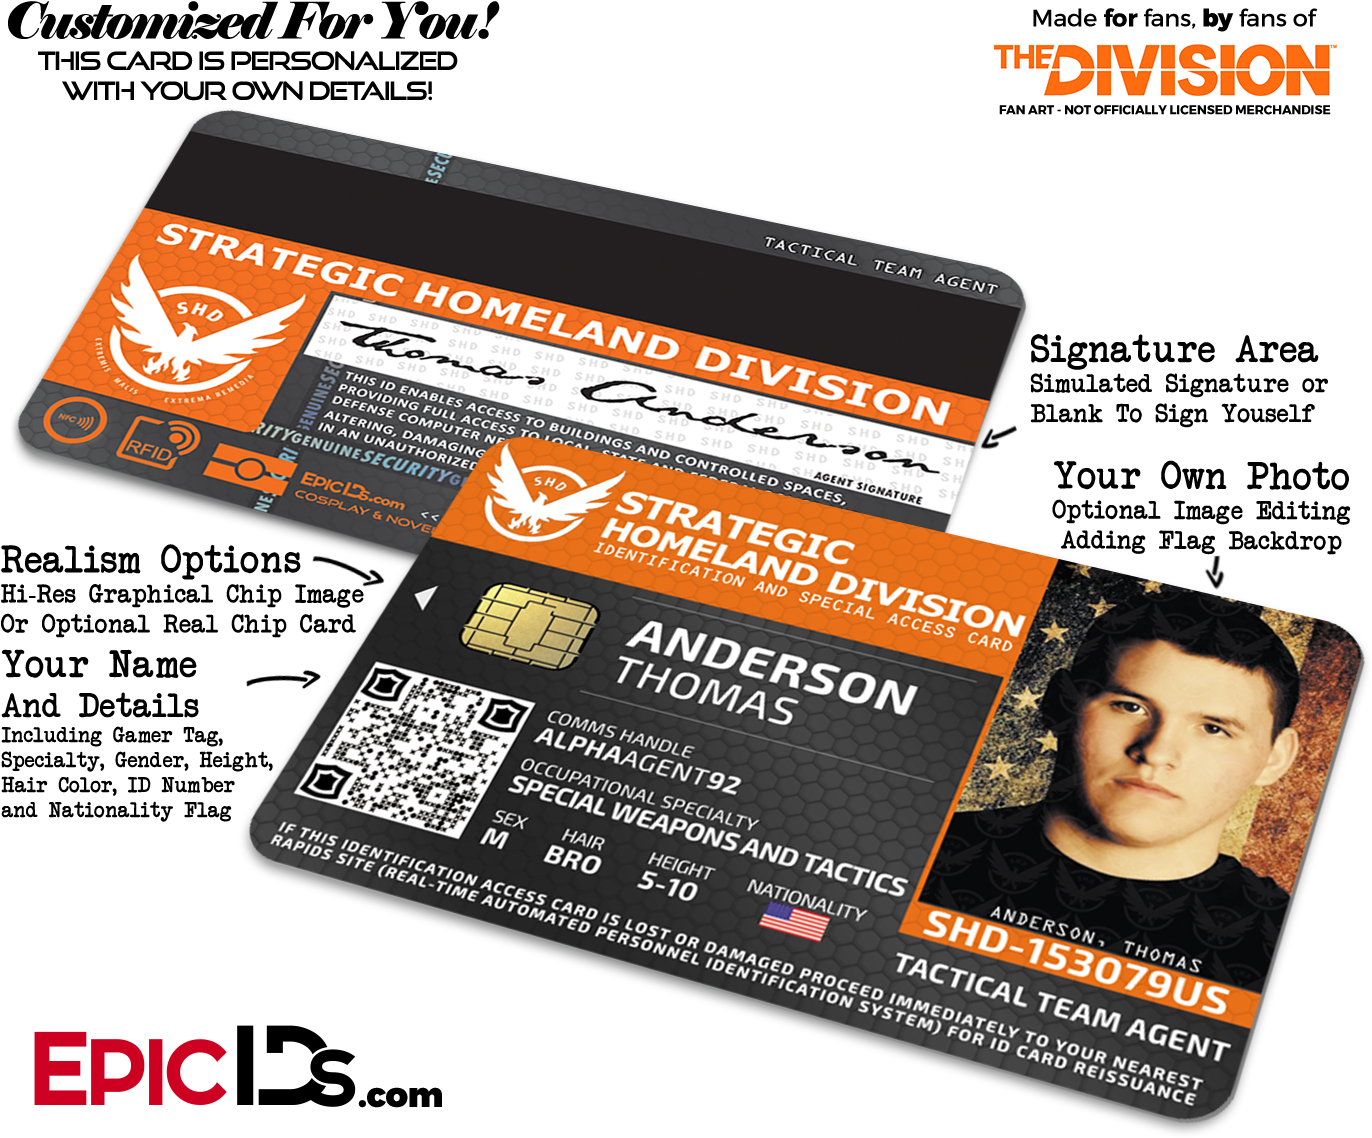 Customized Strategic Homeland Division I D Cards PNG